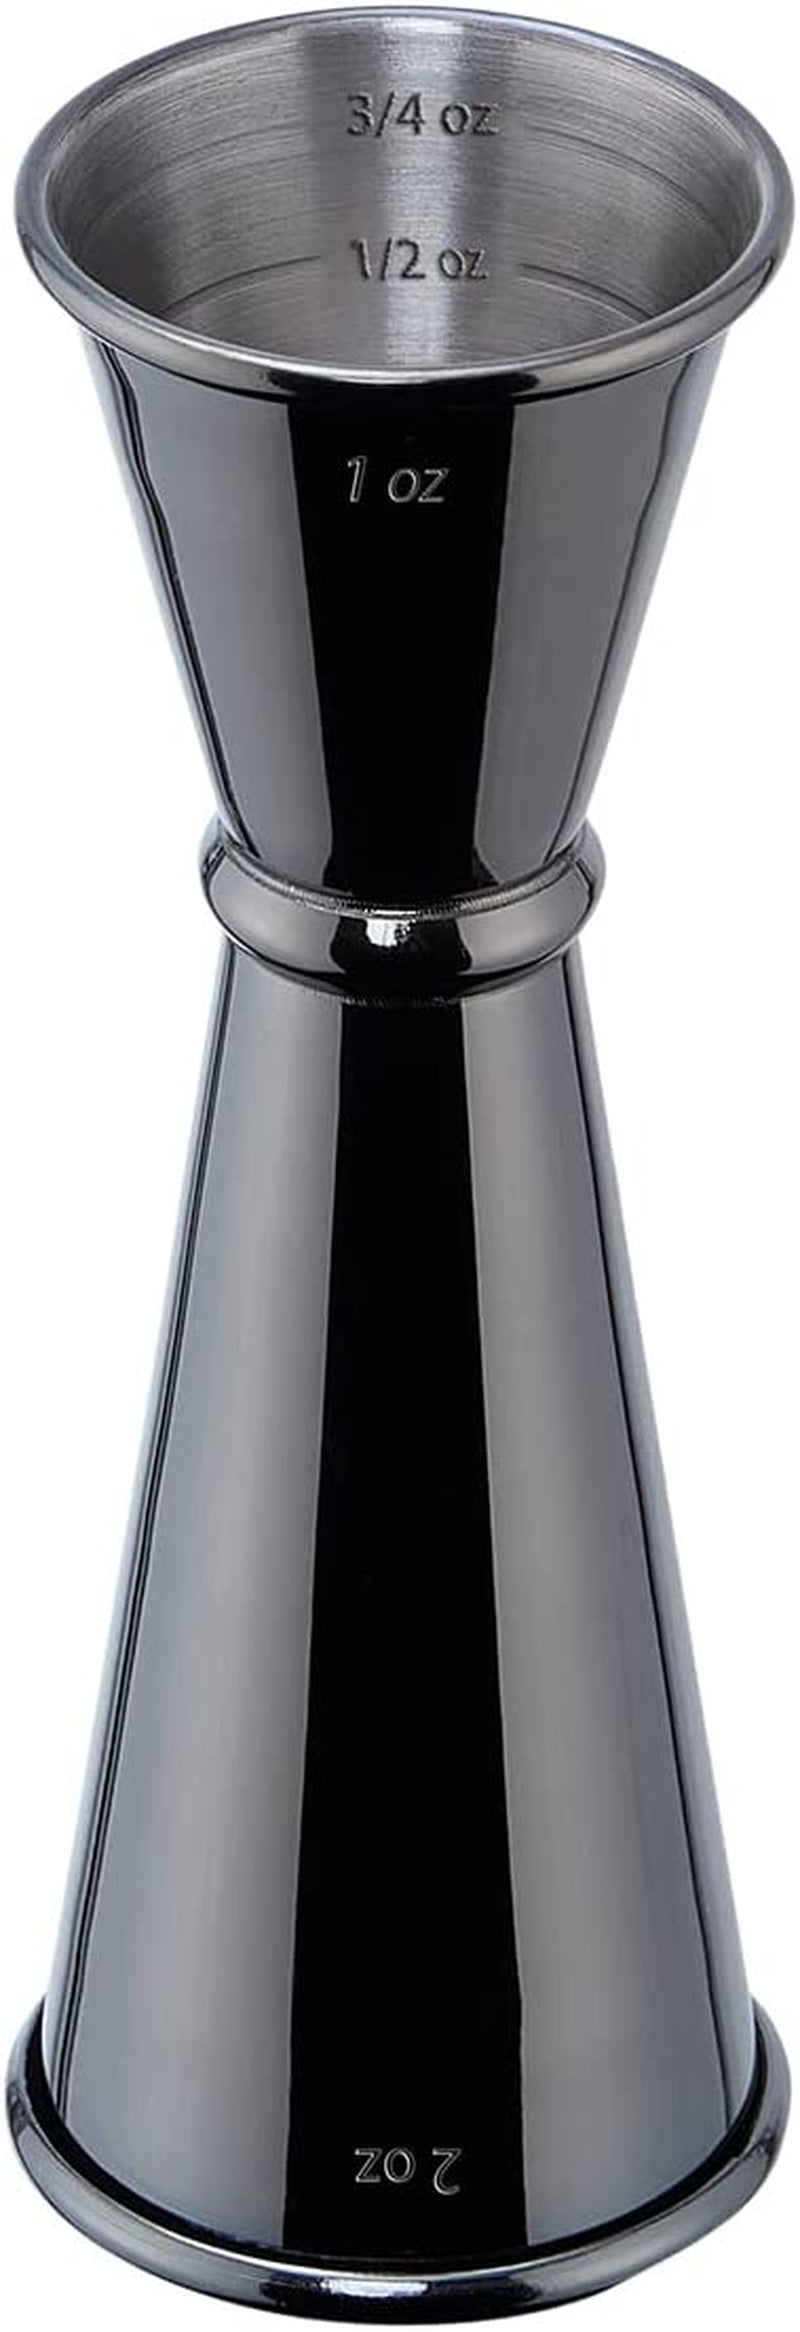 Briout Jigger for Bartending, Double Cocktail Jigger Japanese Premium 304 Stainless Steel Jigger 2 OZ 1 OZ with Measurements Inside